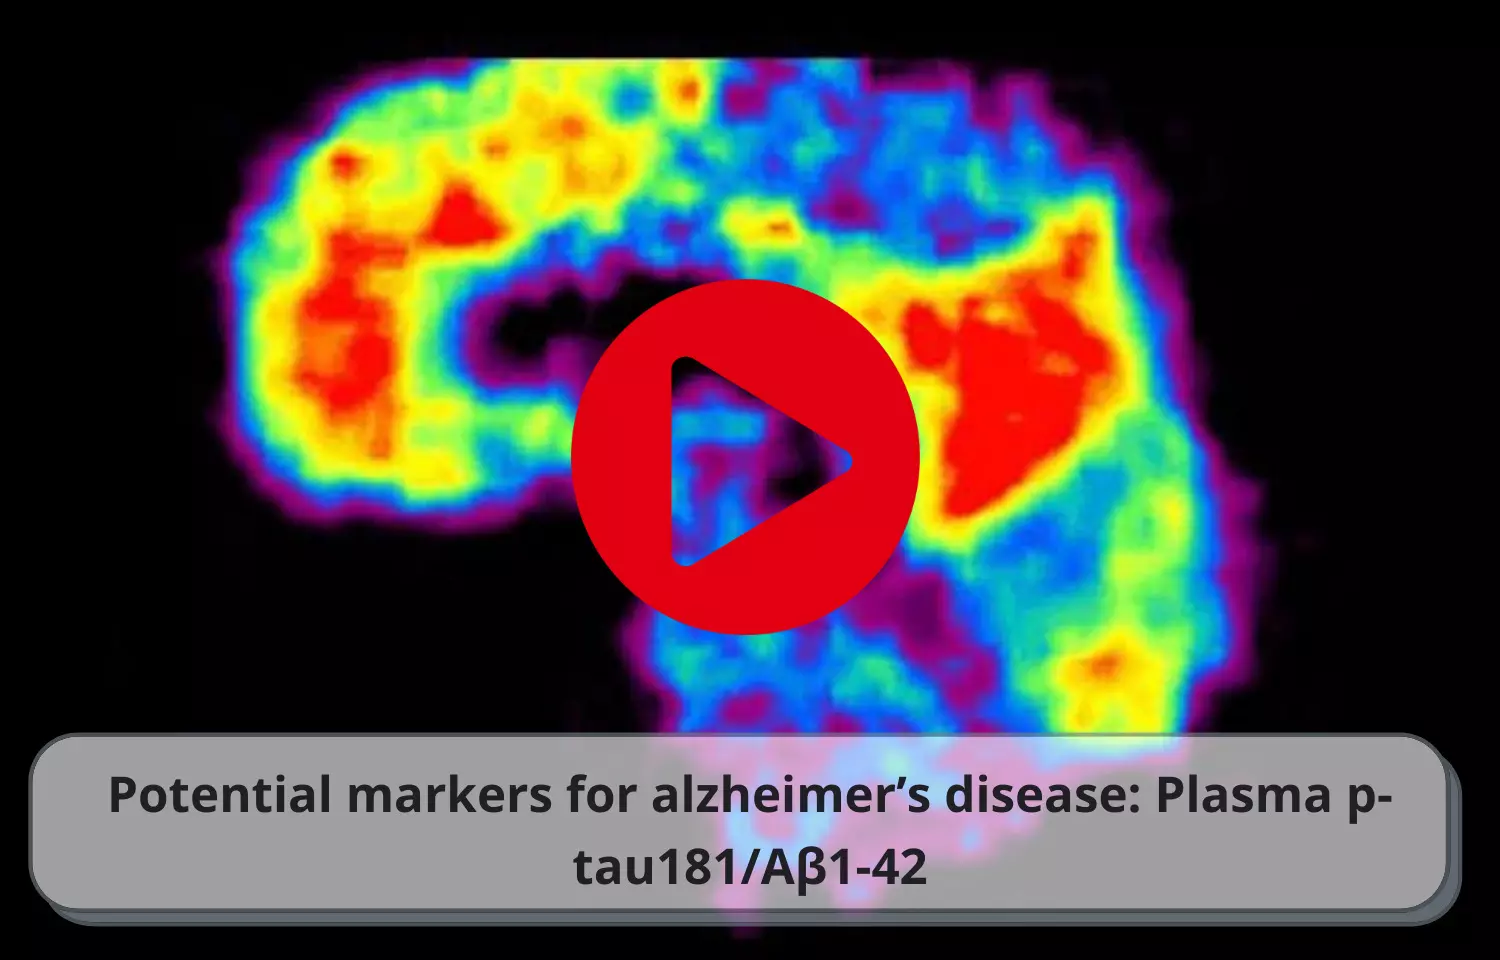 Potential markers for alzheimers disease: Plasma p-tau181/Aβ1-42